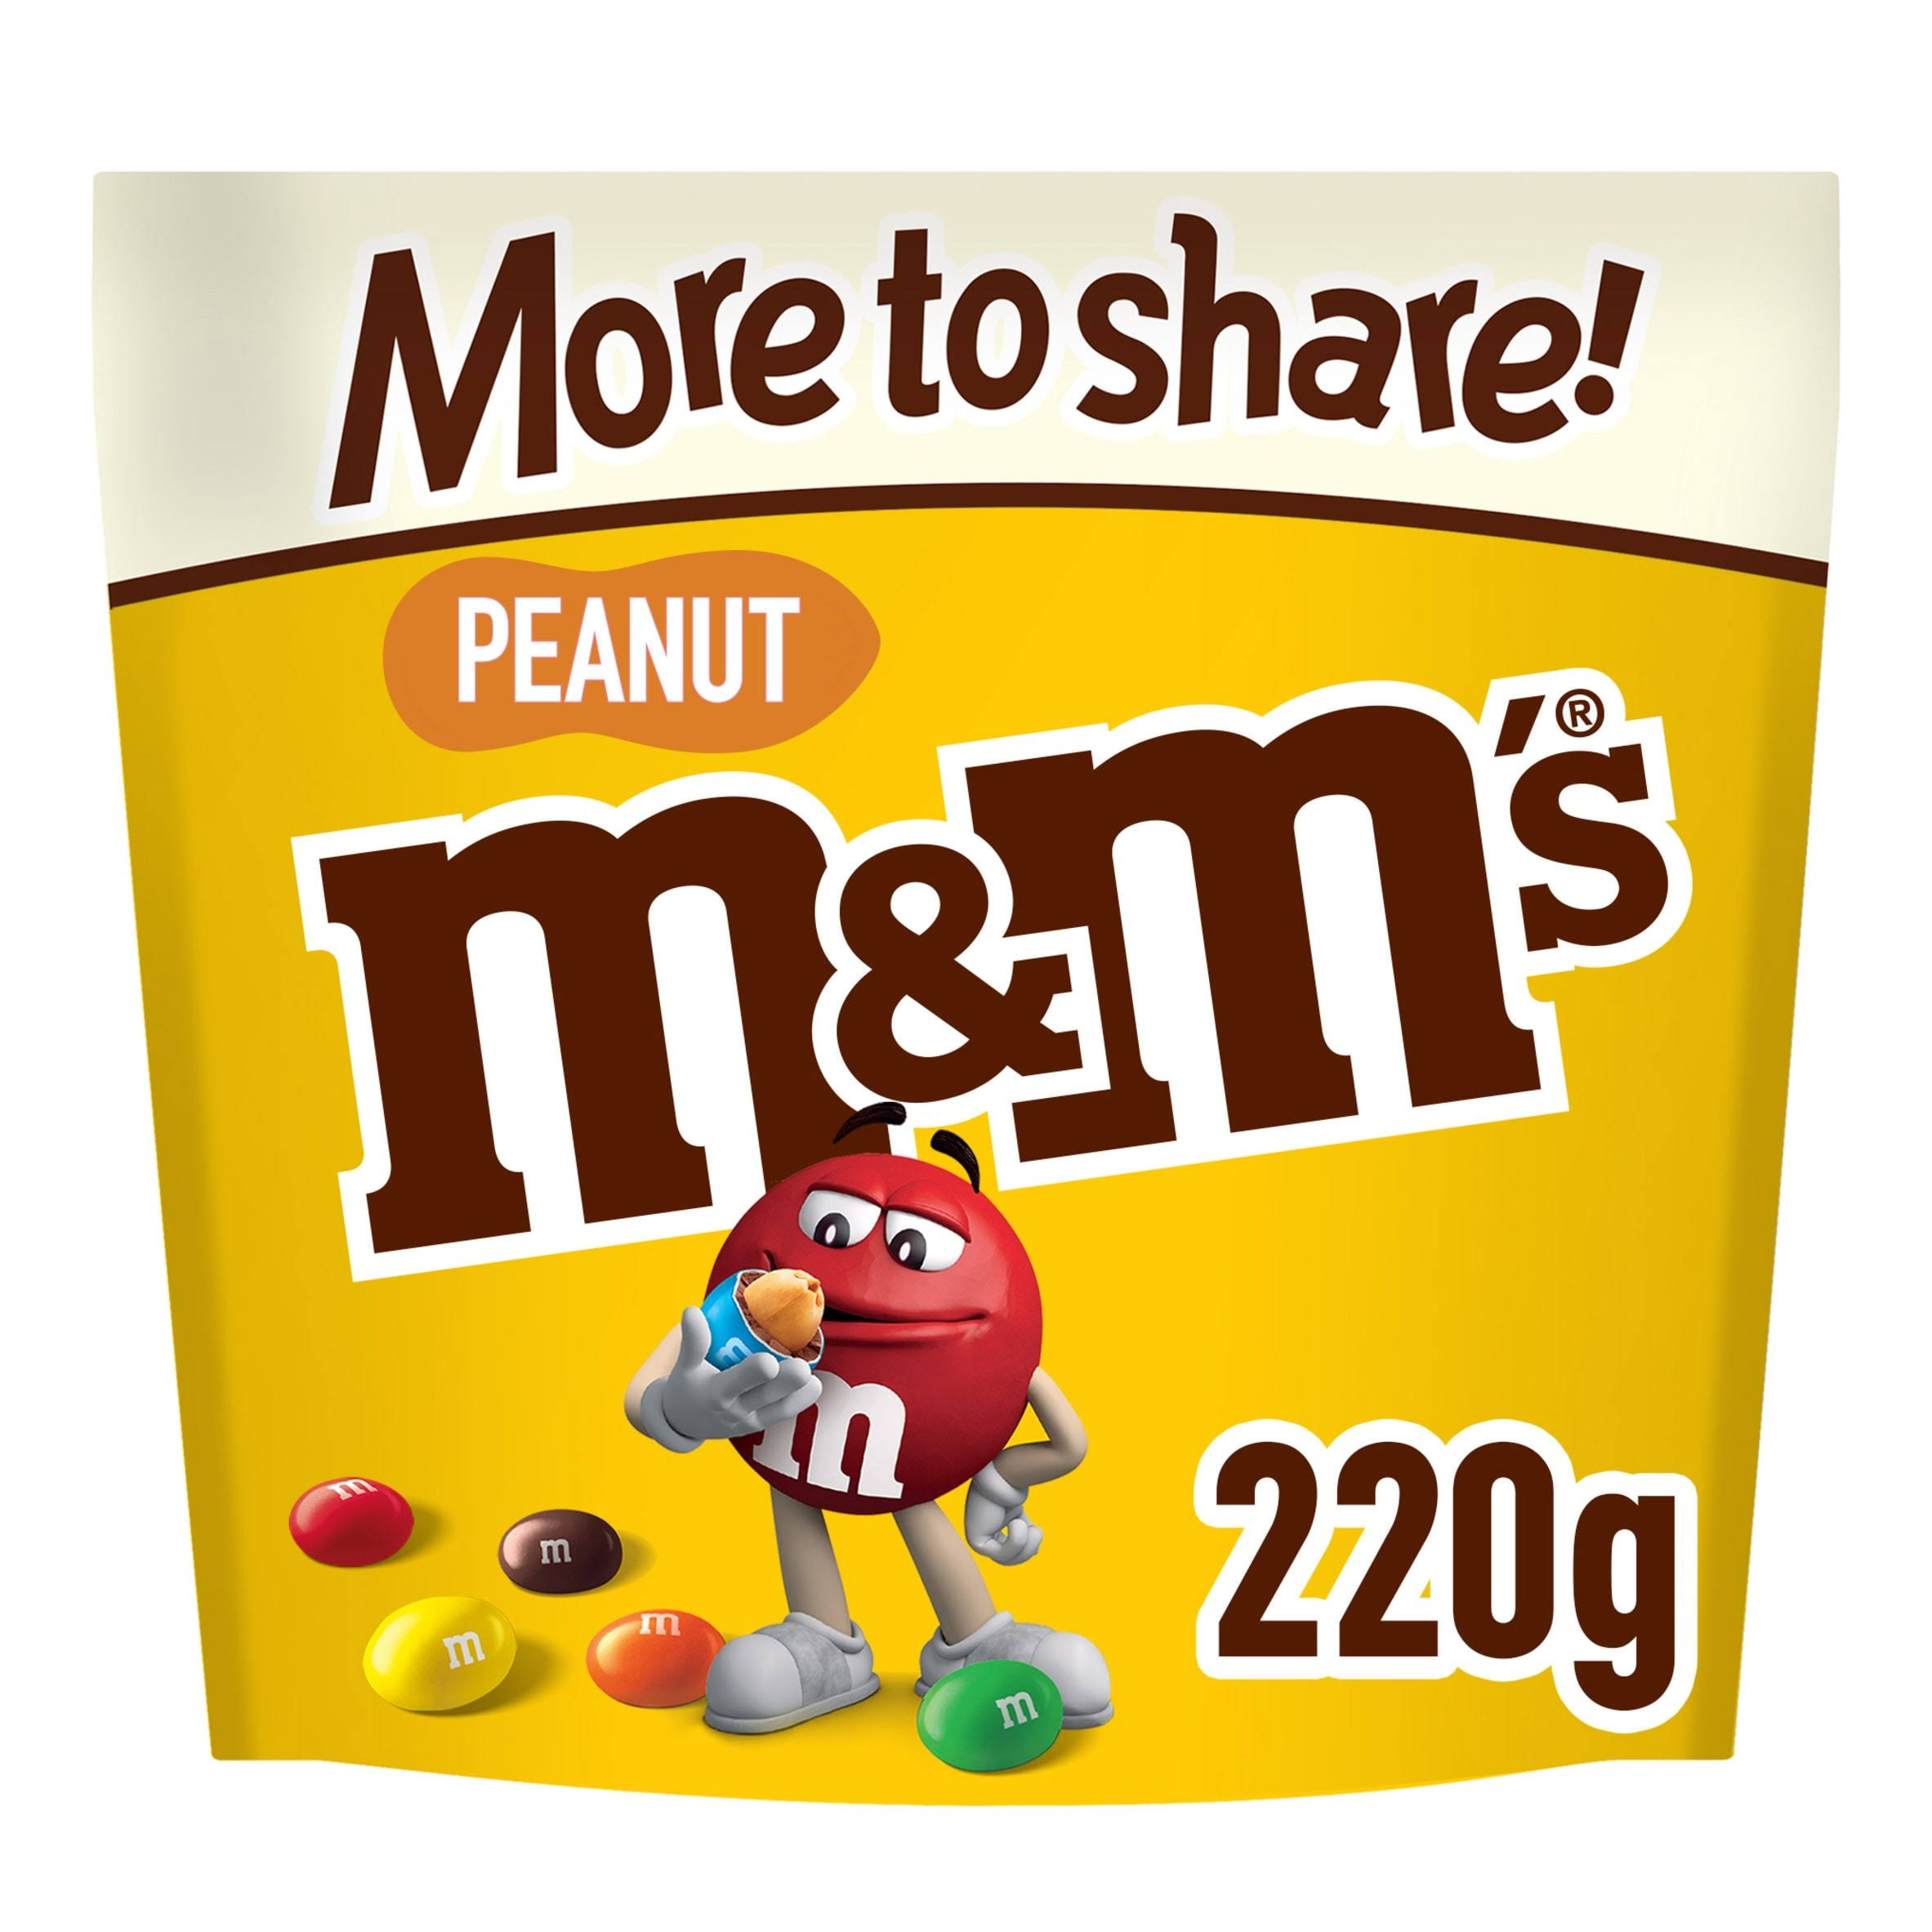 m&m's Crispy Chocolate More to Share Pouch Bag 213g